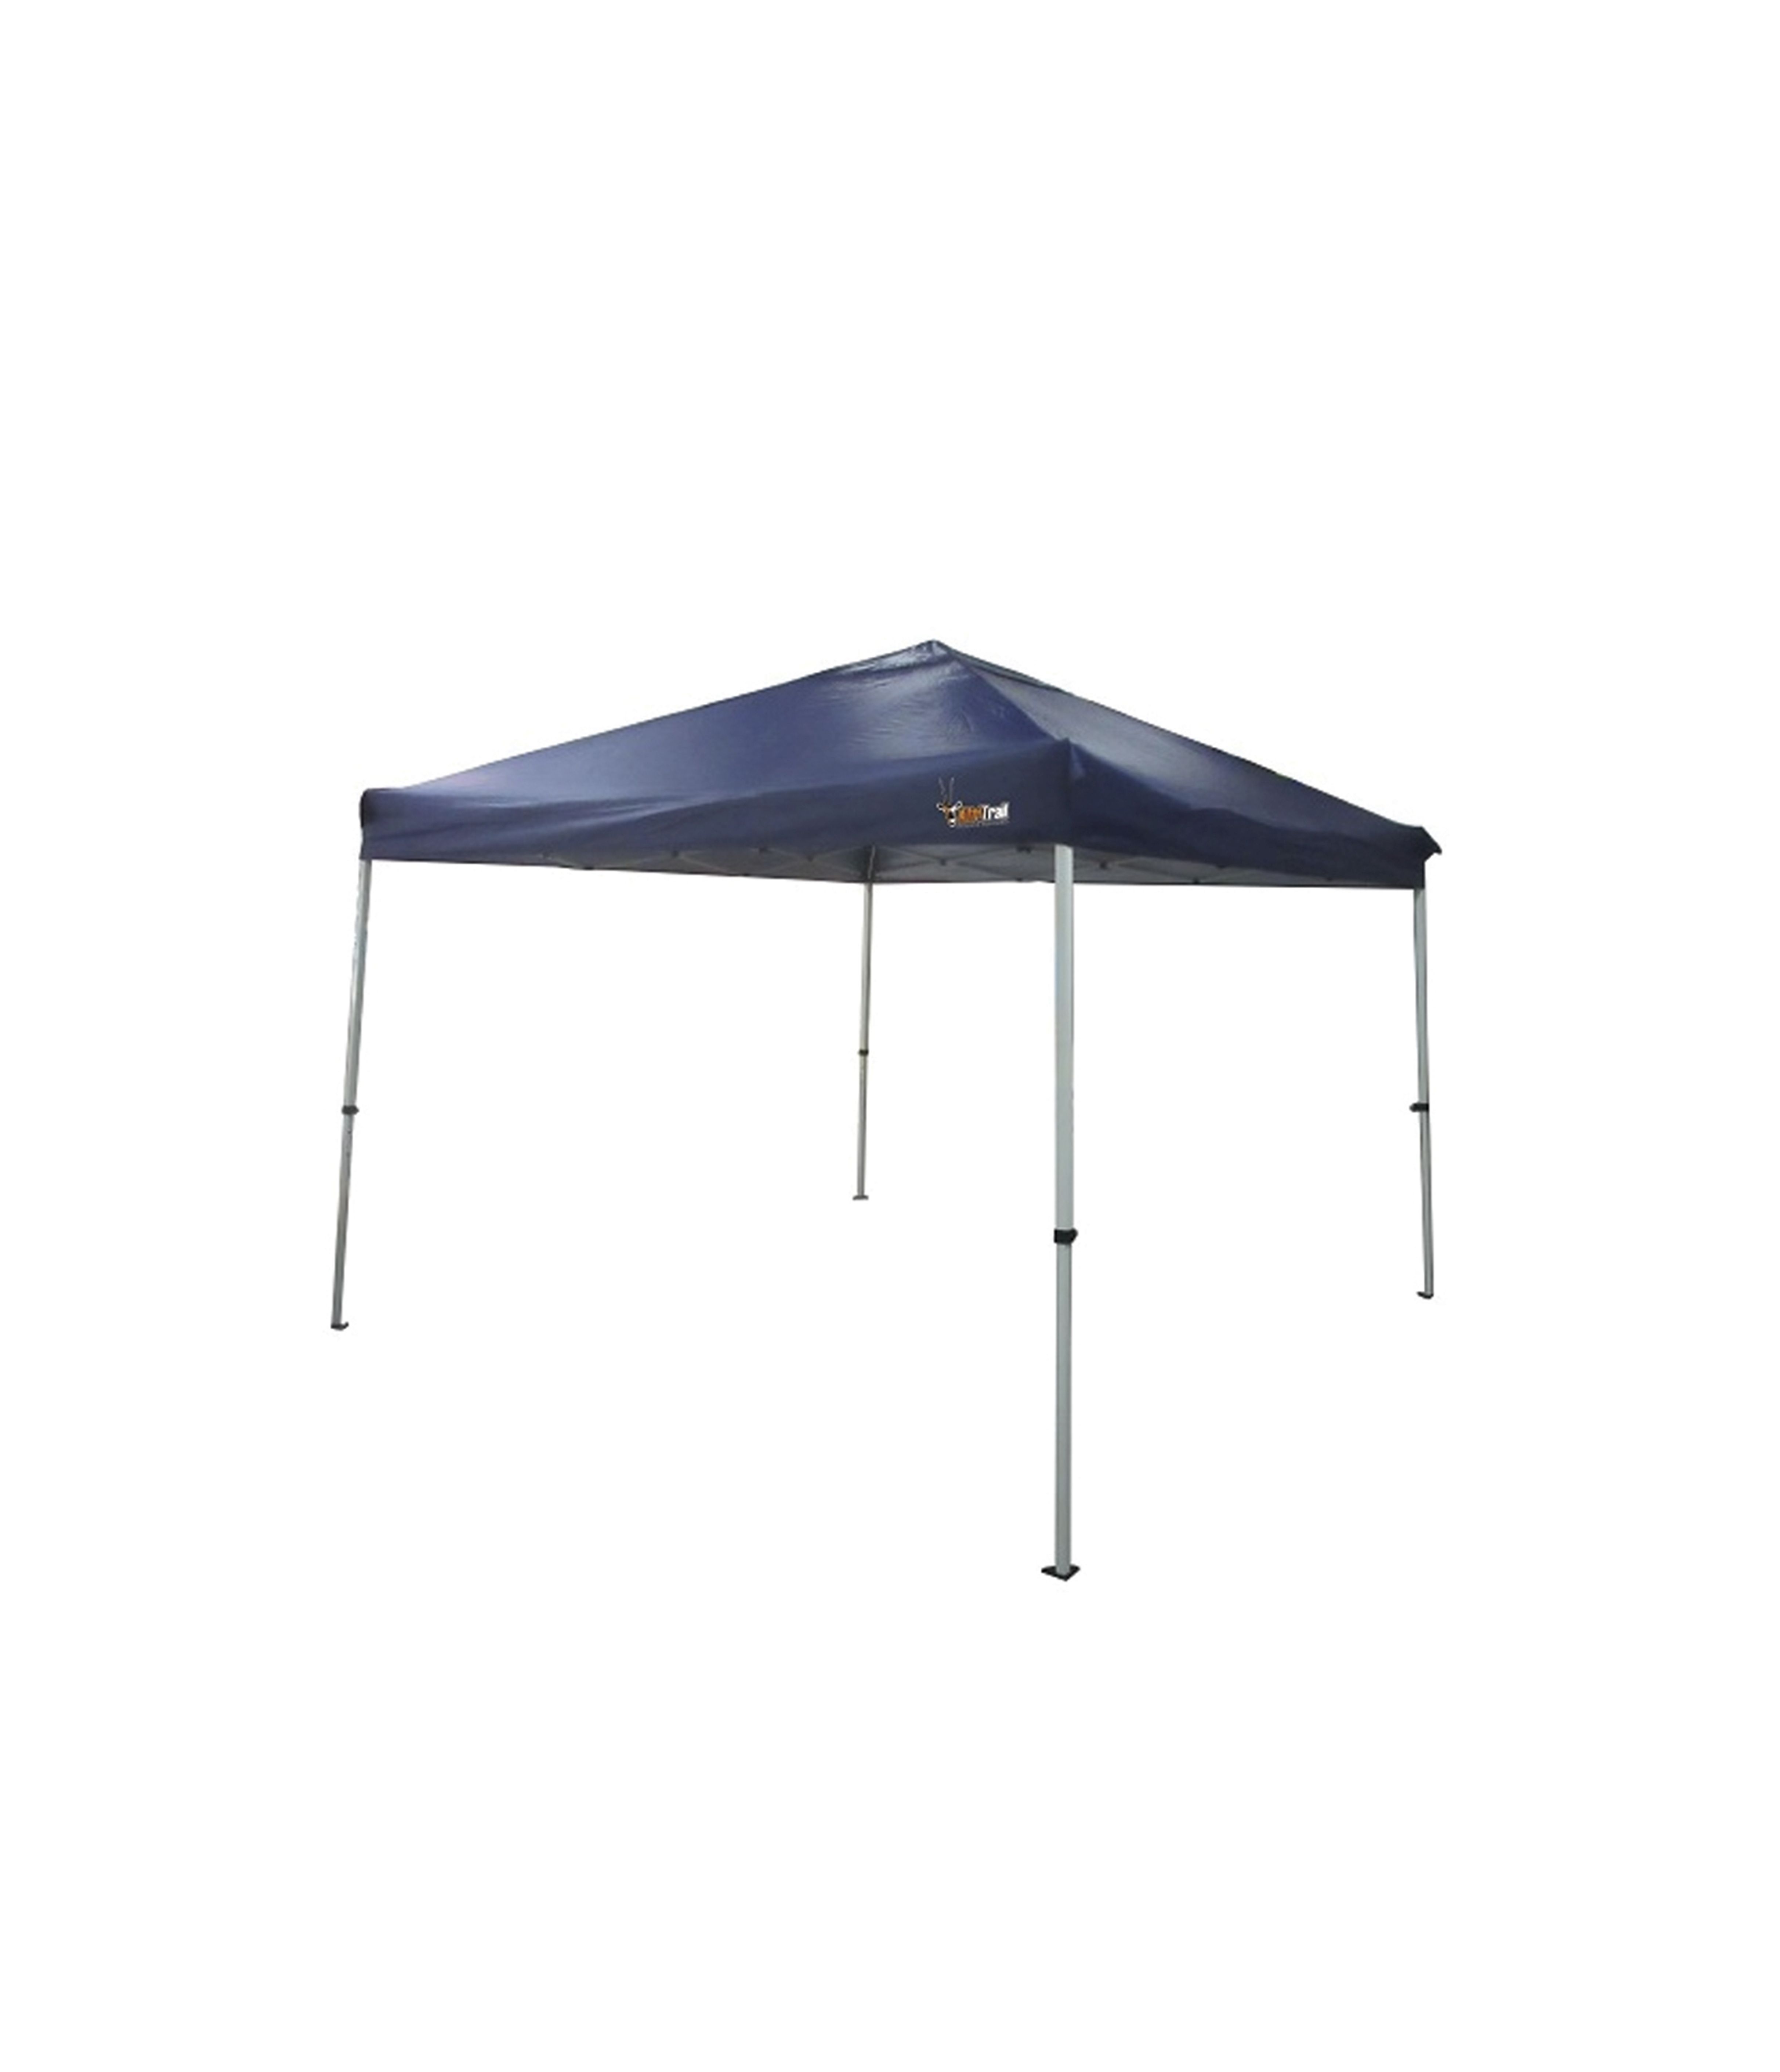 AfriTrail Deluxe Quick Pitch Gazebo Navy Blue 3 x 3m